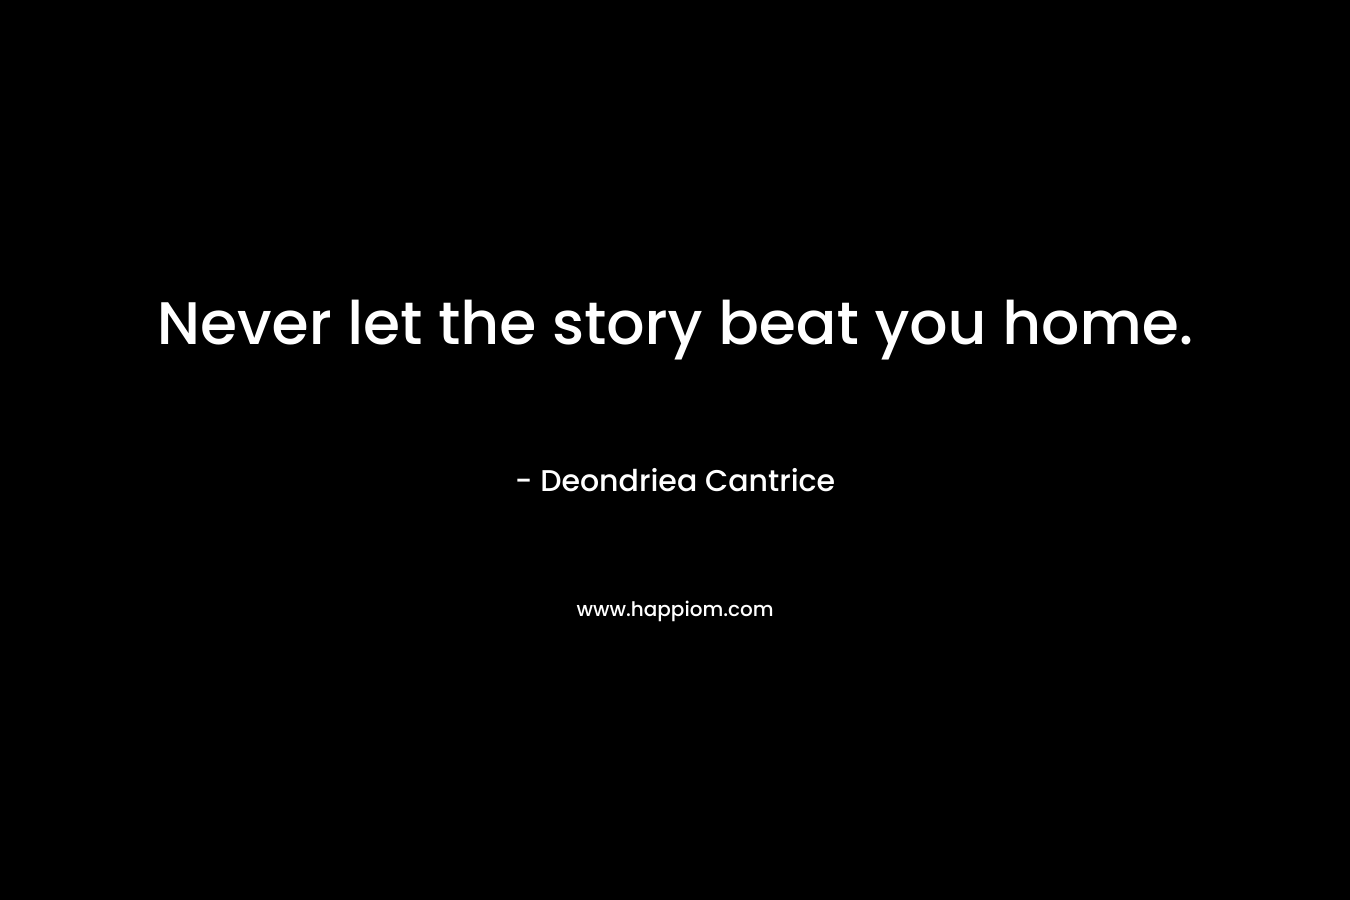 Never let the story beat you home.